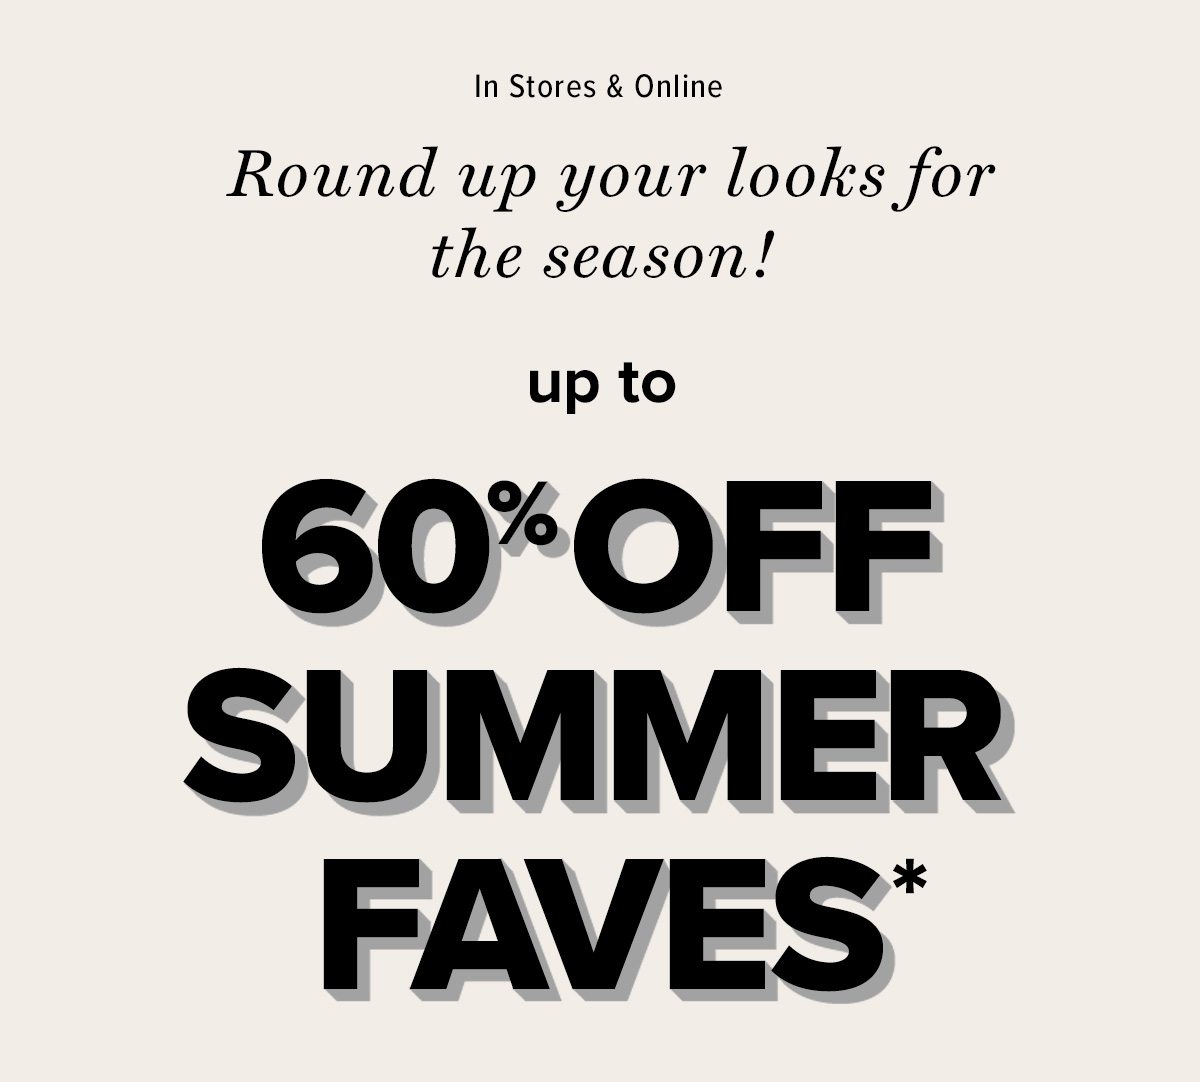 Up to 60% Off Summer Faves